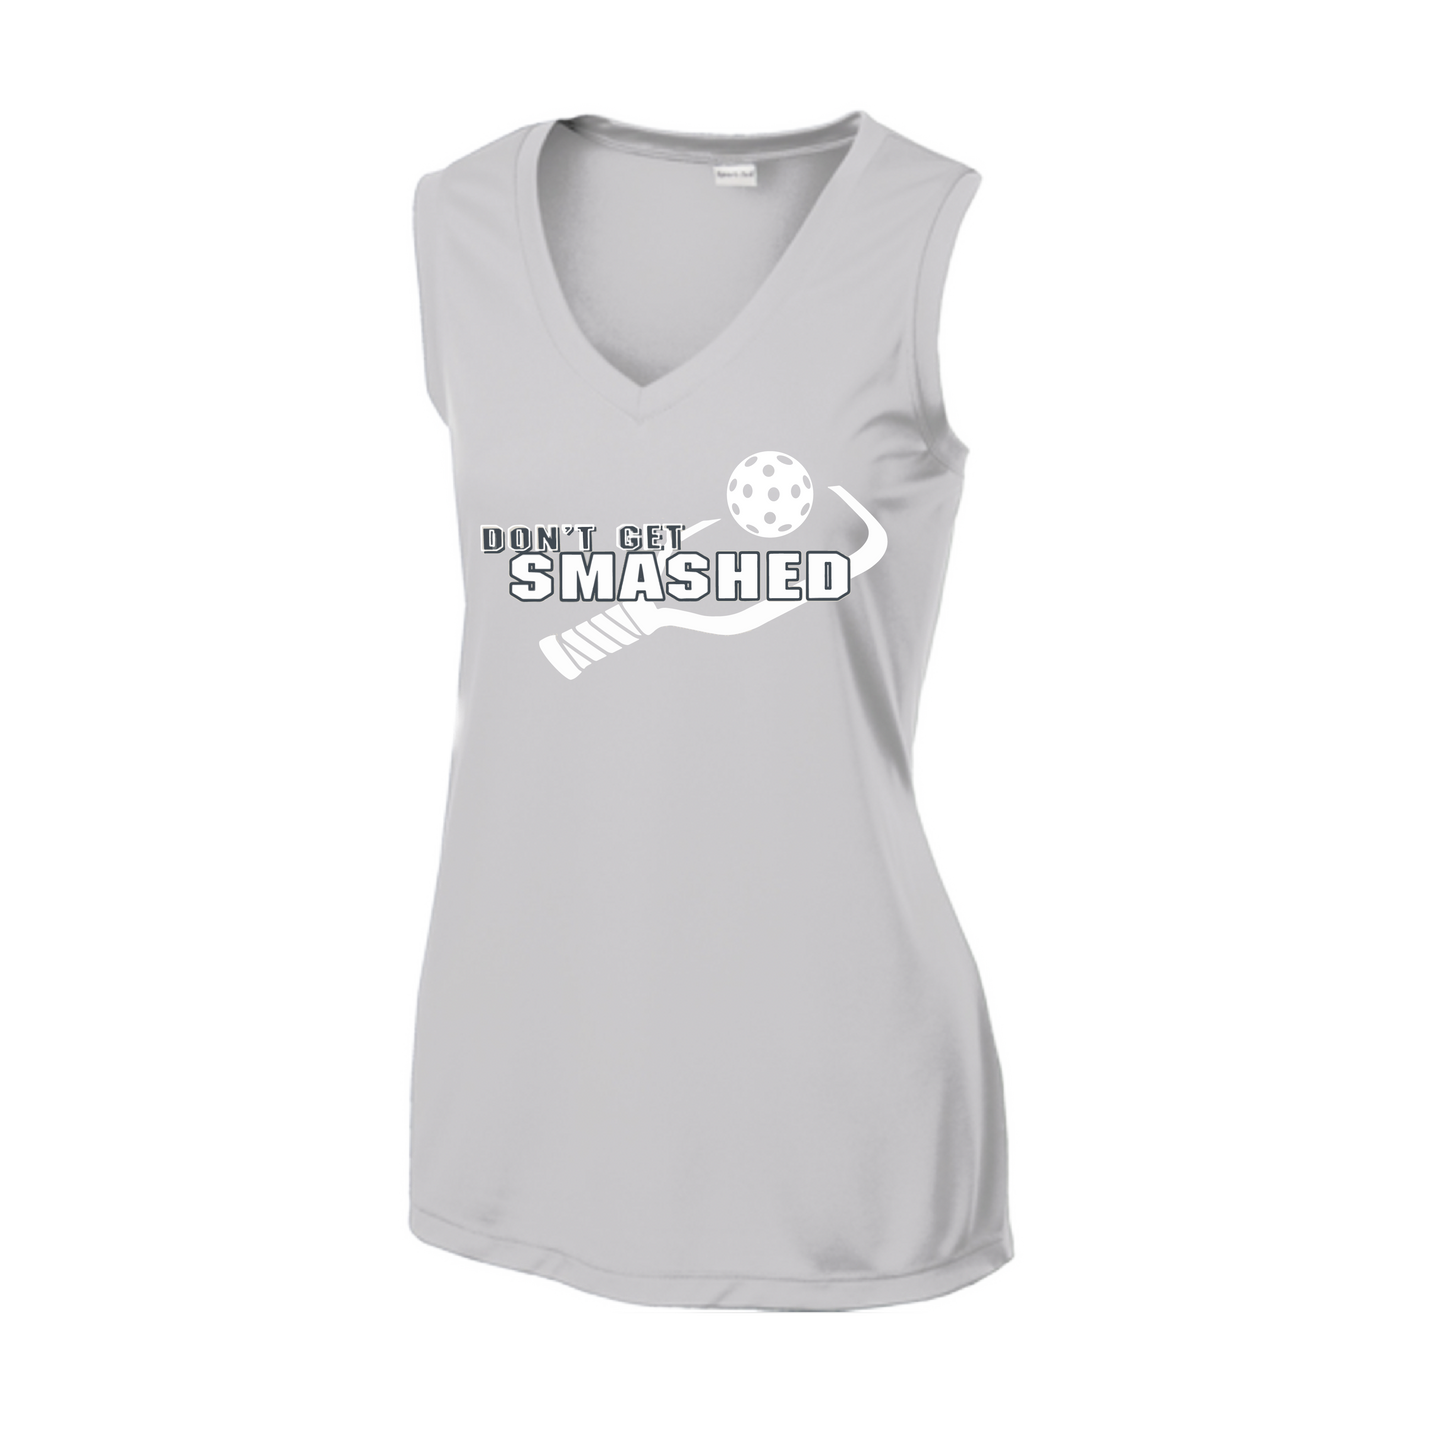 Constructed with lightweight and airy fabric, the sleeveless pickleball shirts are designed for optimal athletic performance. Featuring moisture-wicking technology and PosiCharge color lock, these shirts provide comfort and durability.